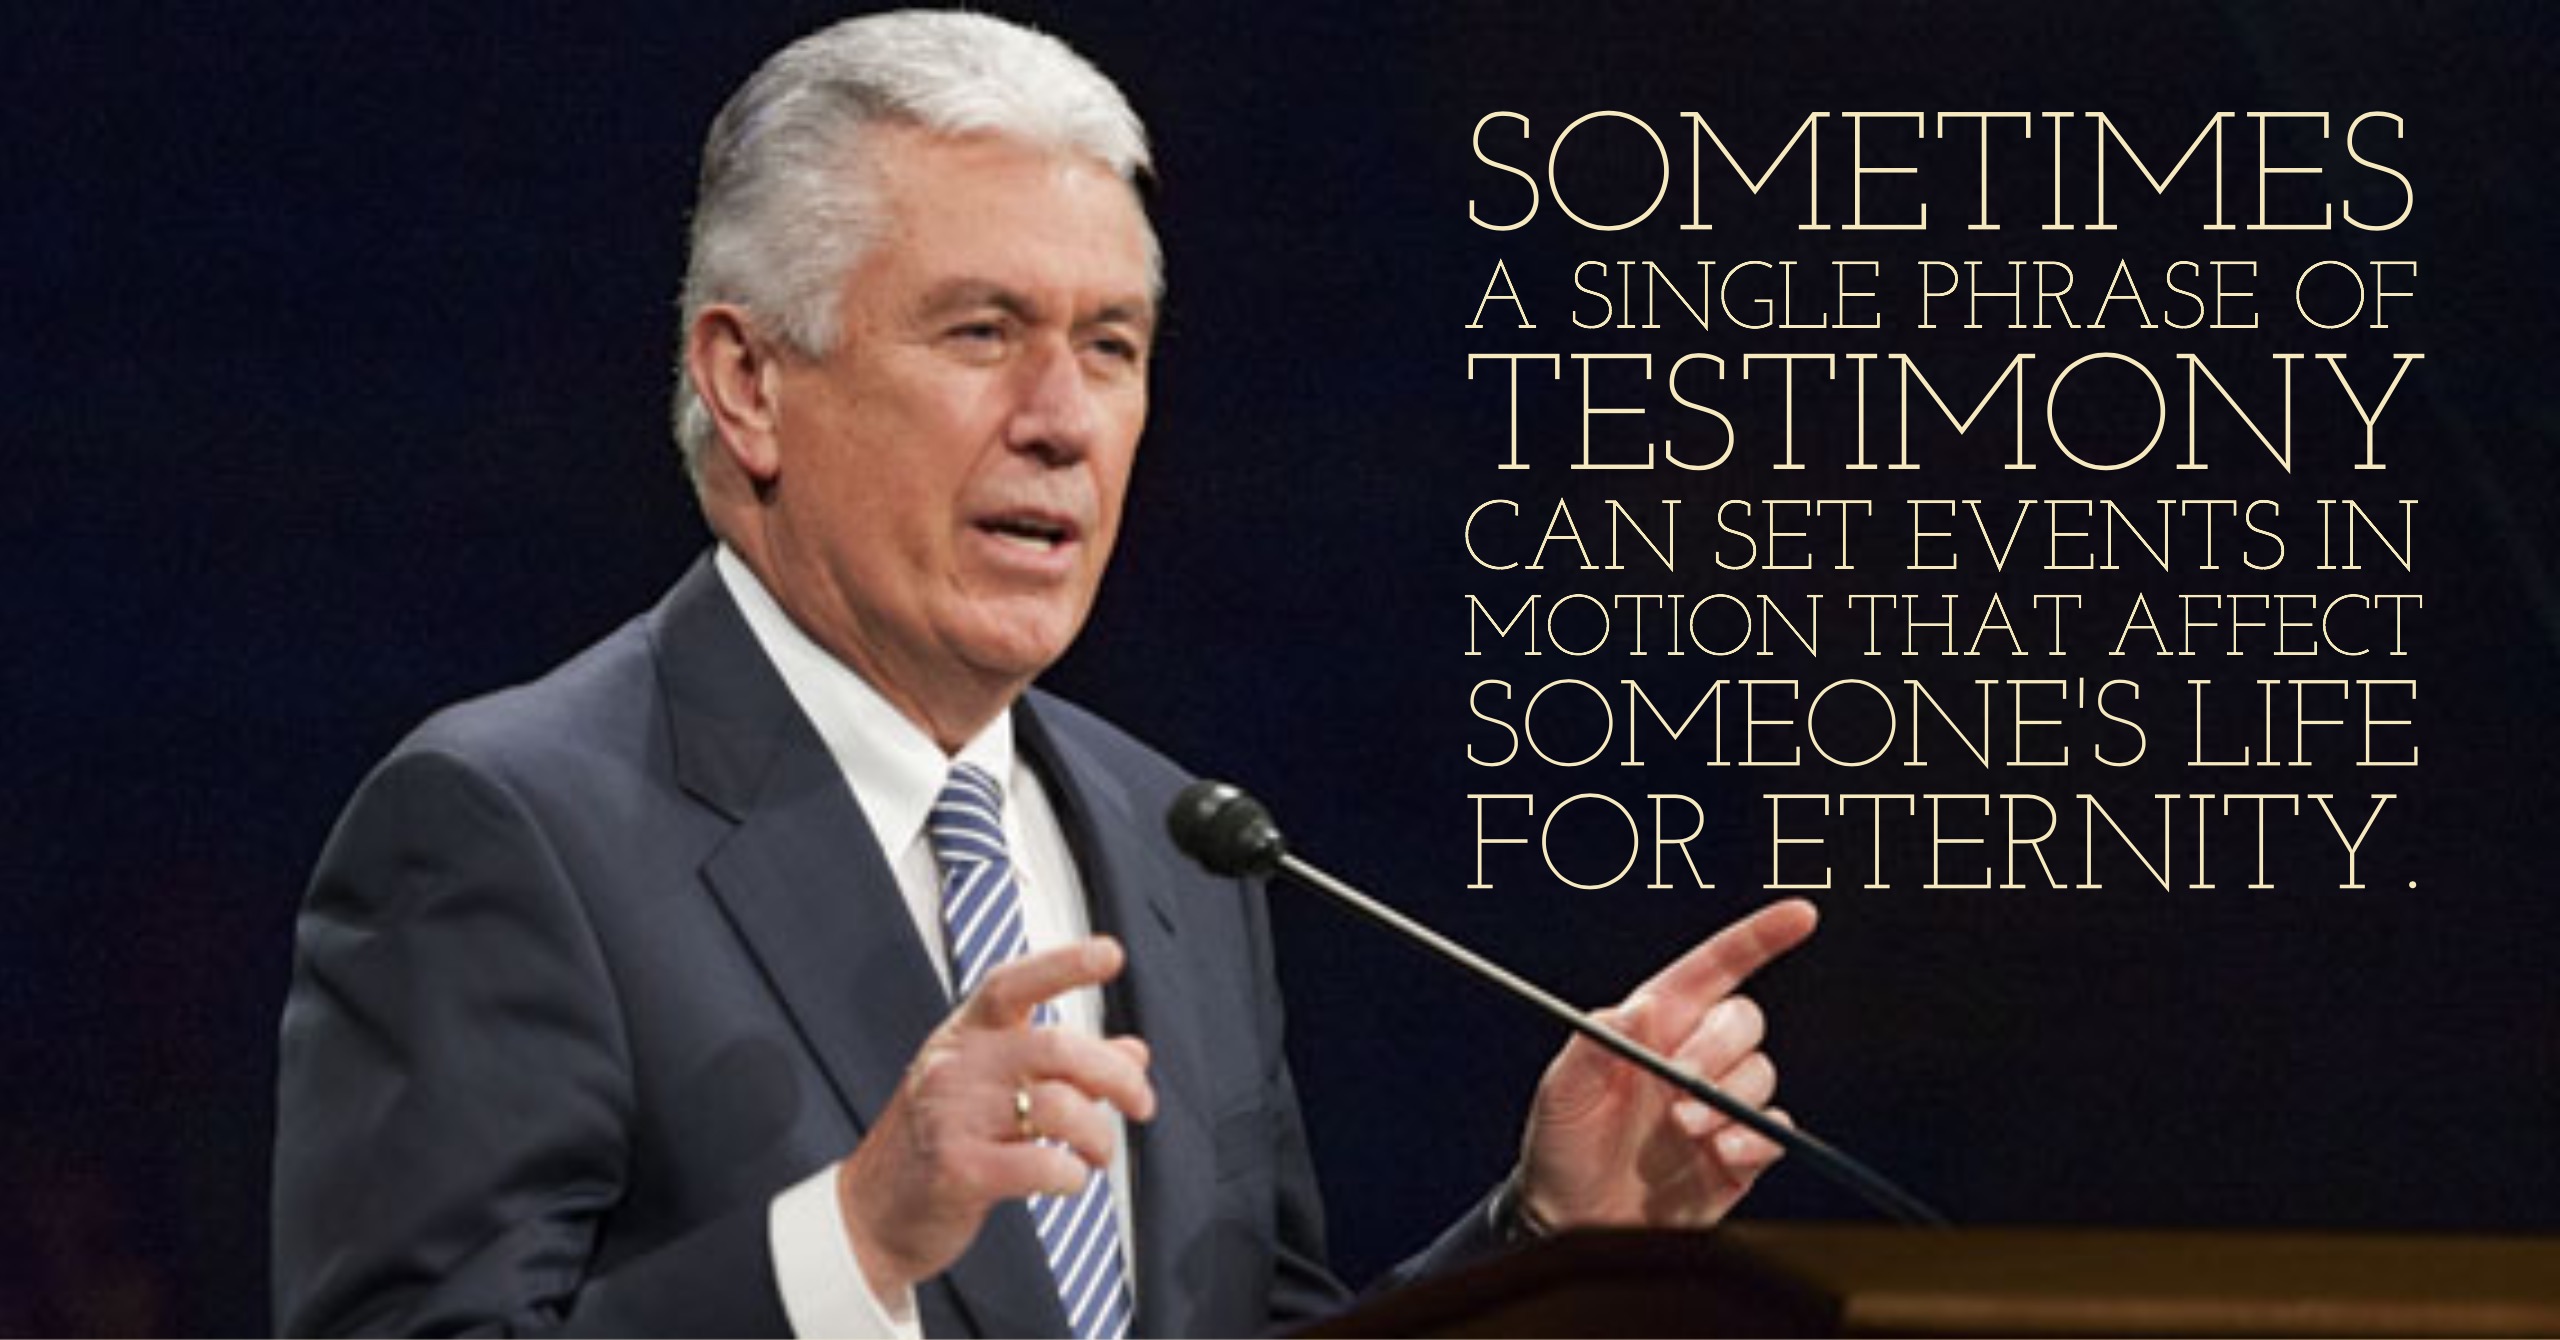 A picture of President Dieter F. Uchtdorf, with the quote, "Sometimes a single phrase of testimony can set events in motion that affect someone's life for eternity."